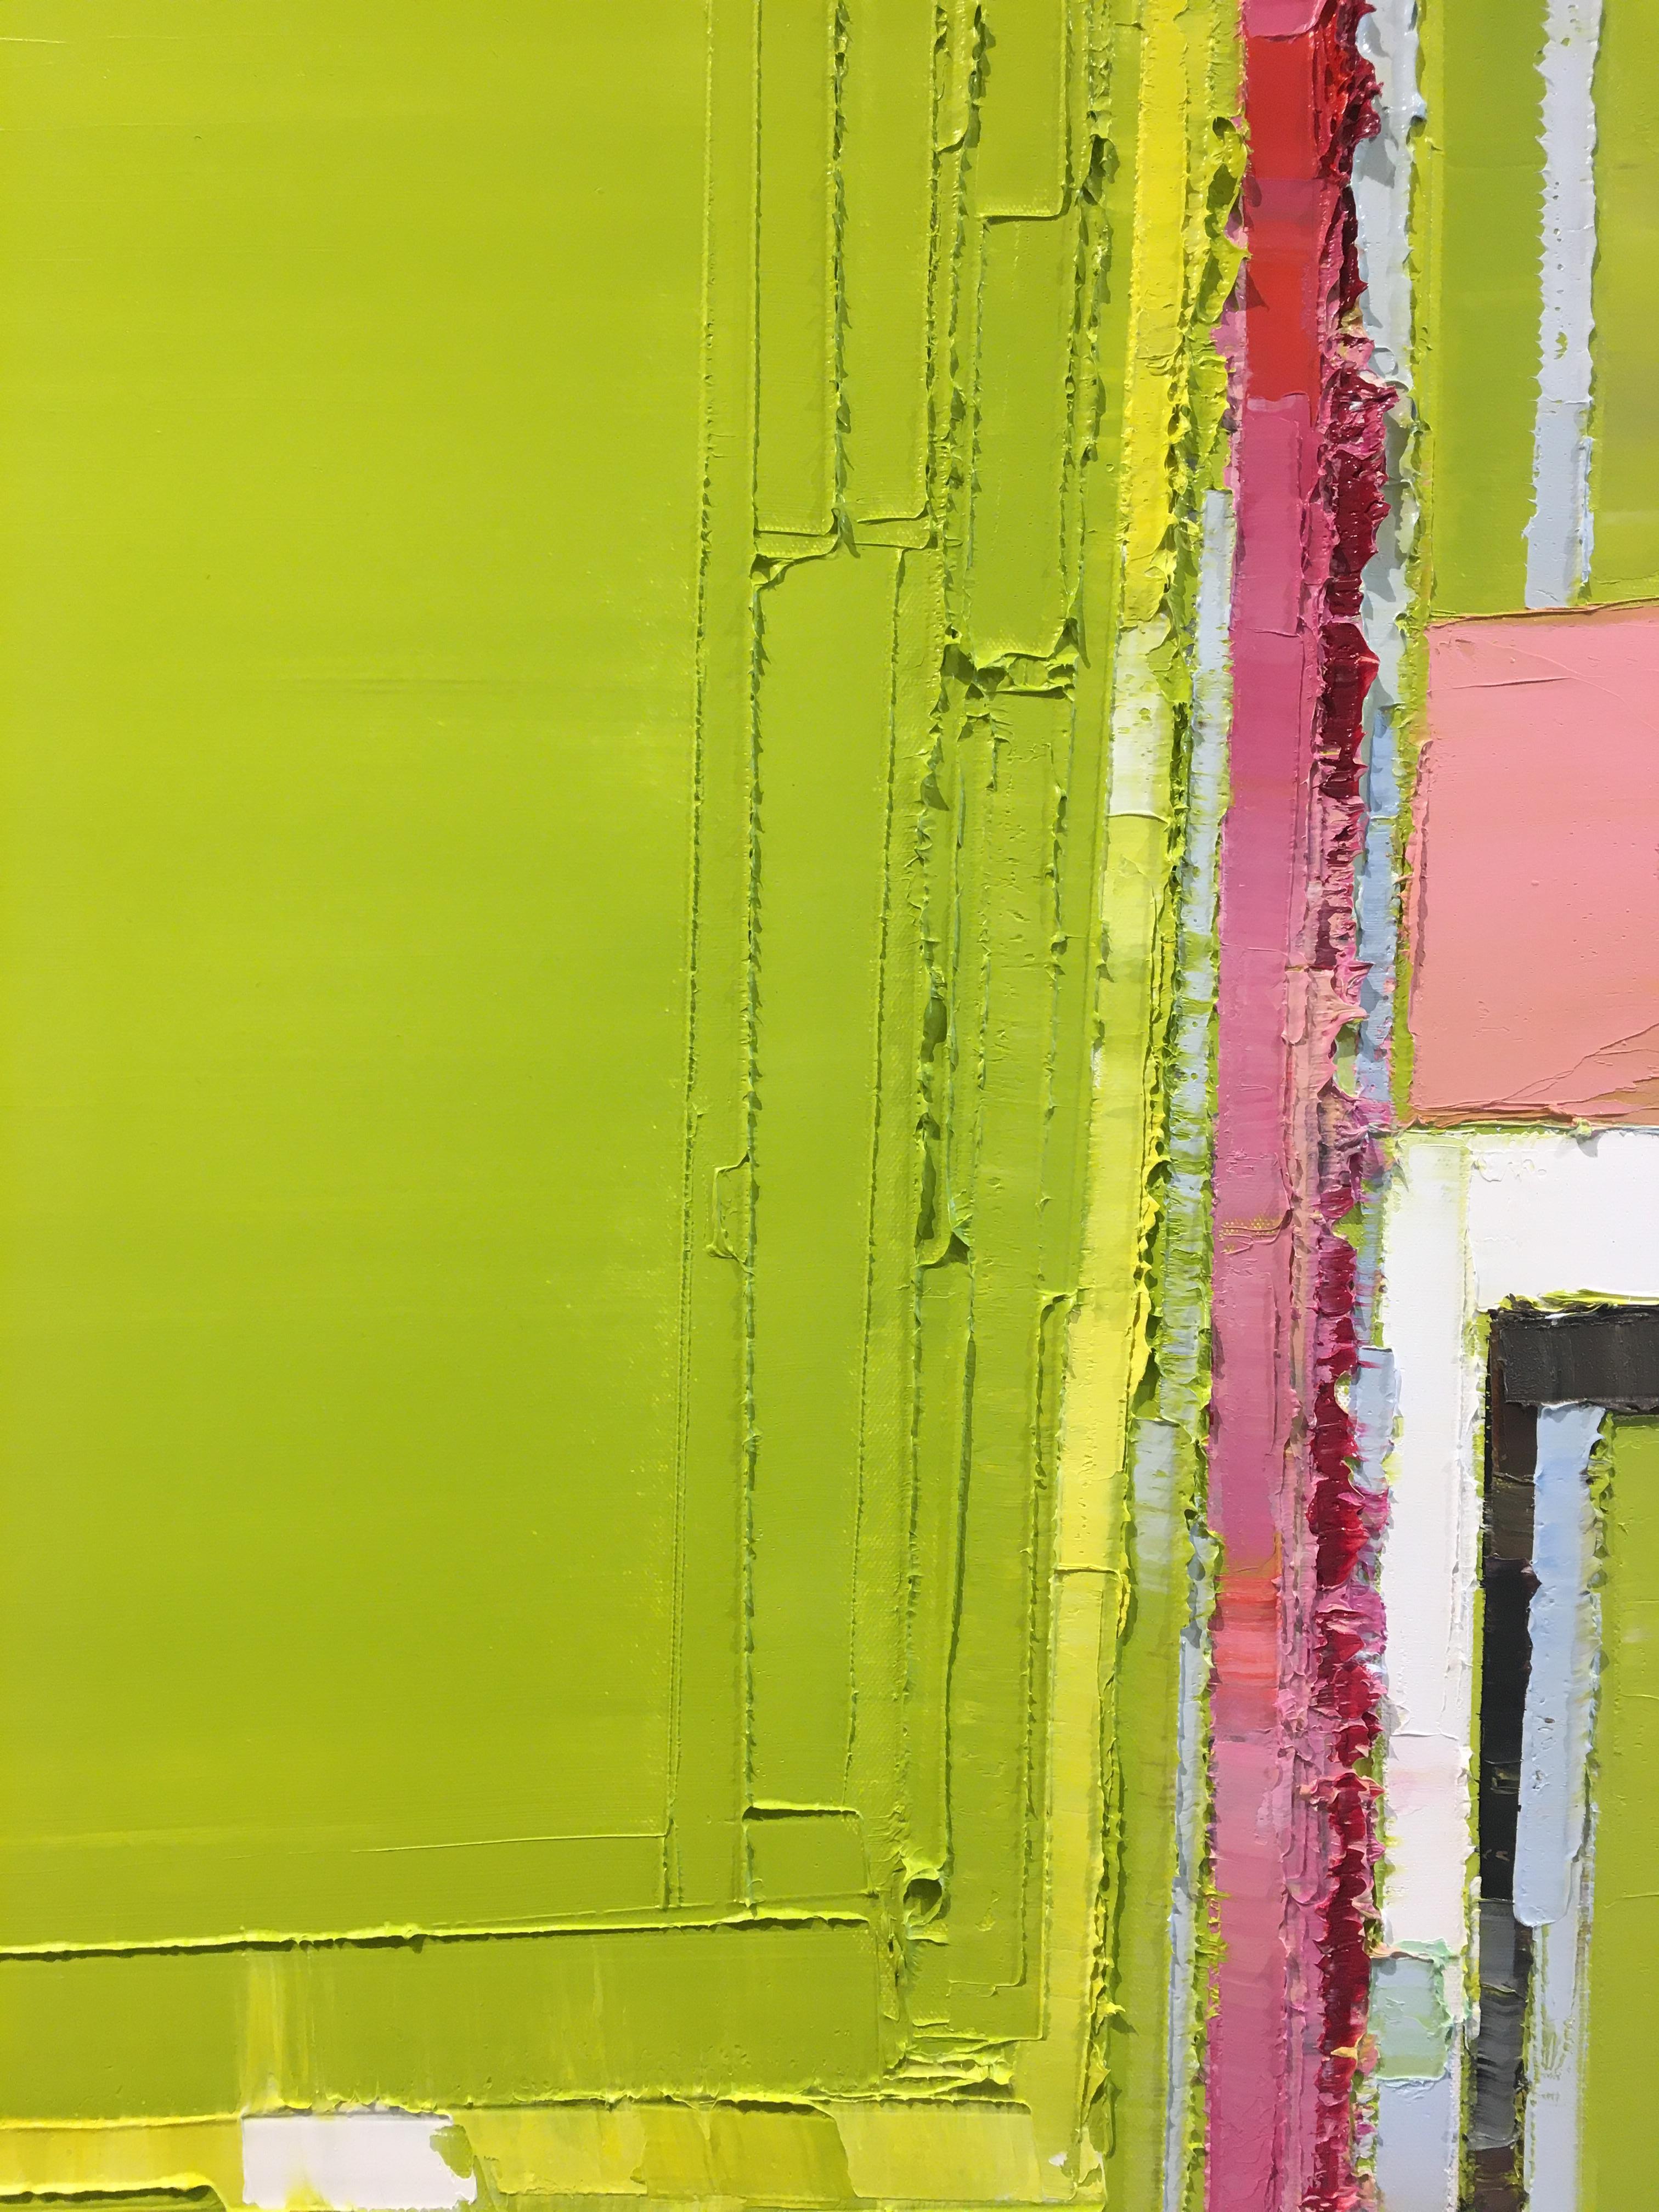 Maya Kabat’s abstract oil paintings reference the urban landscape of Northern California, exploring relationships between architectural elements, California light, and the balance of color, line, plane, and space. Her work often uses intense colors